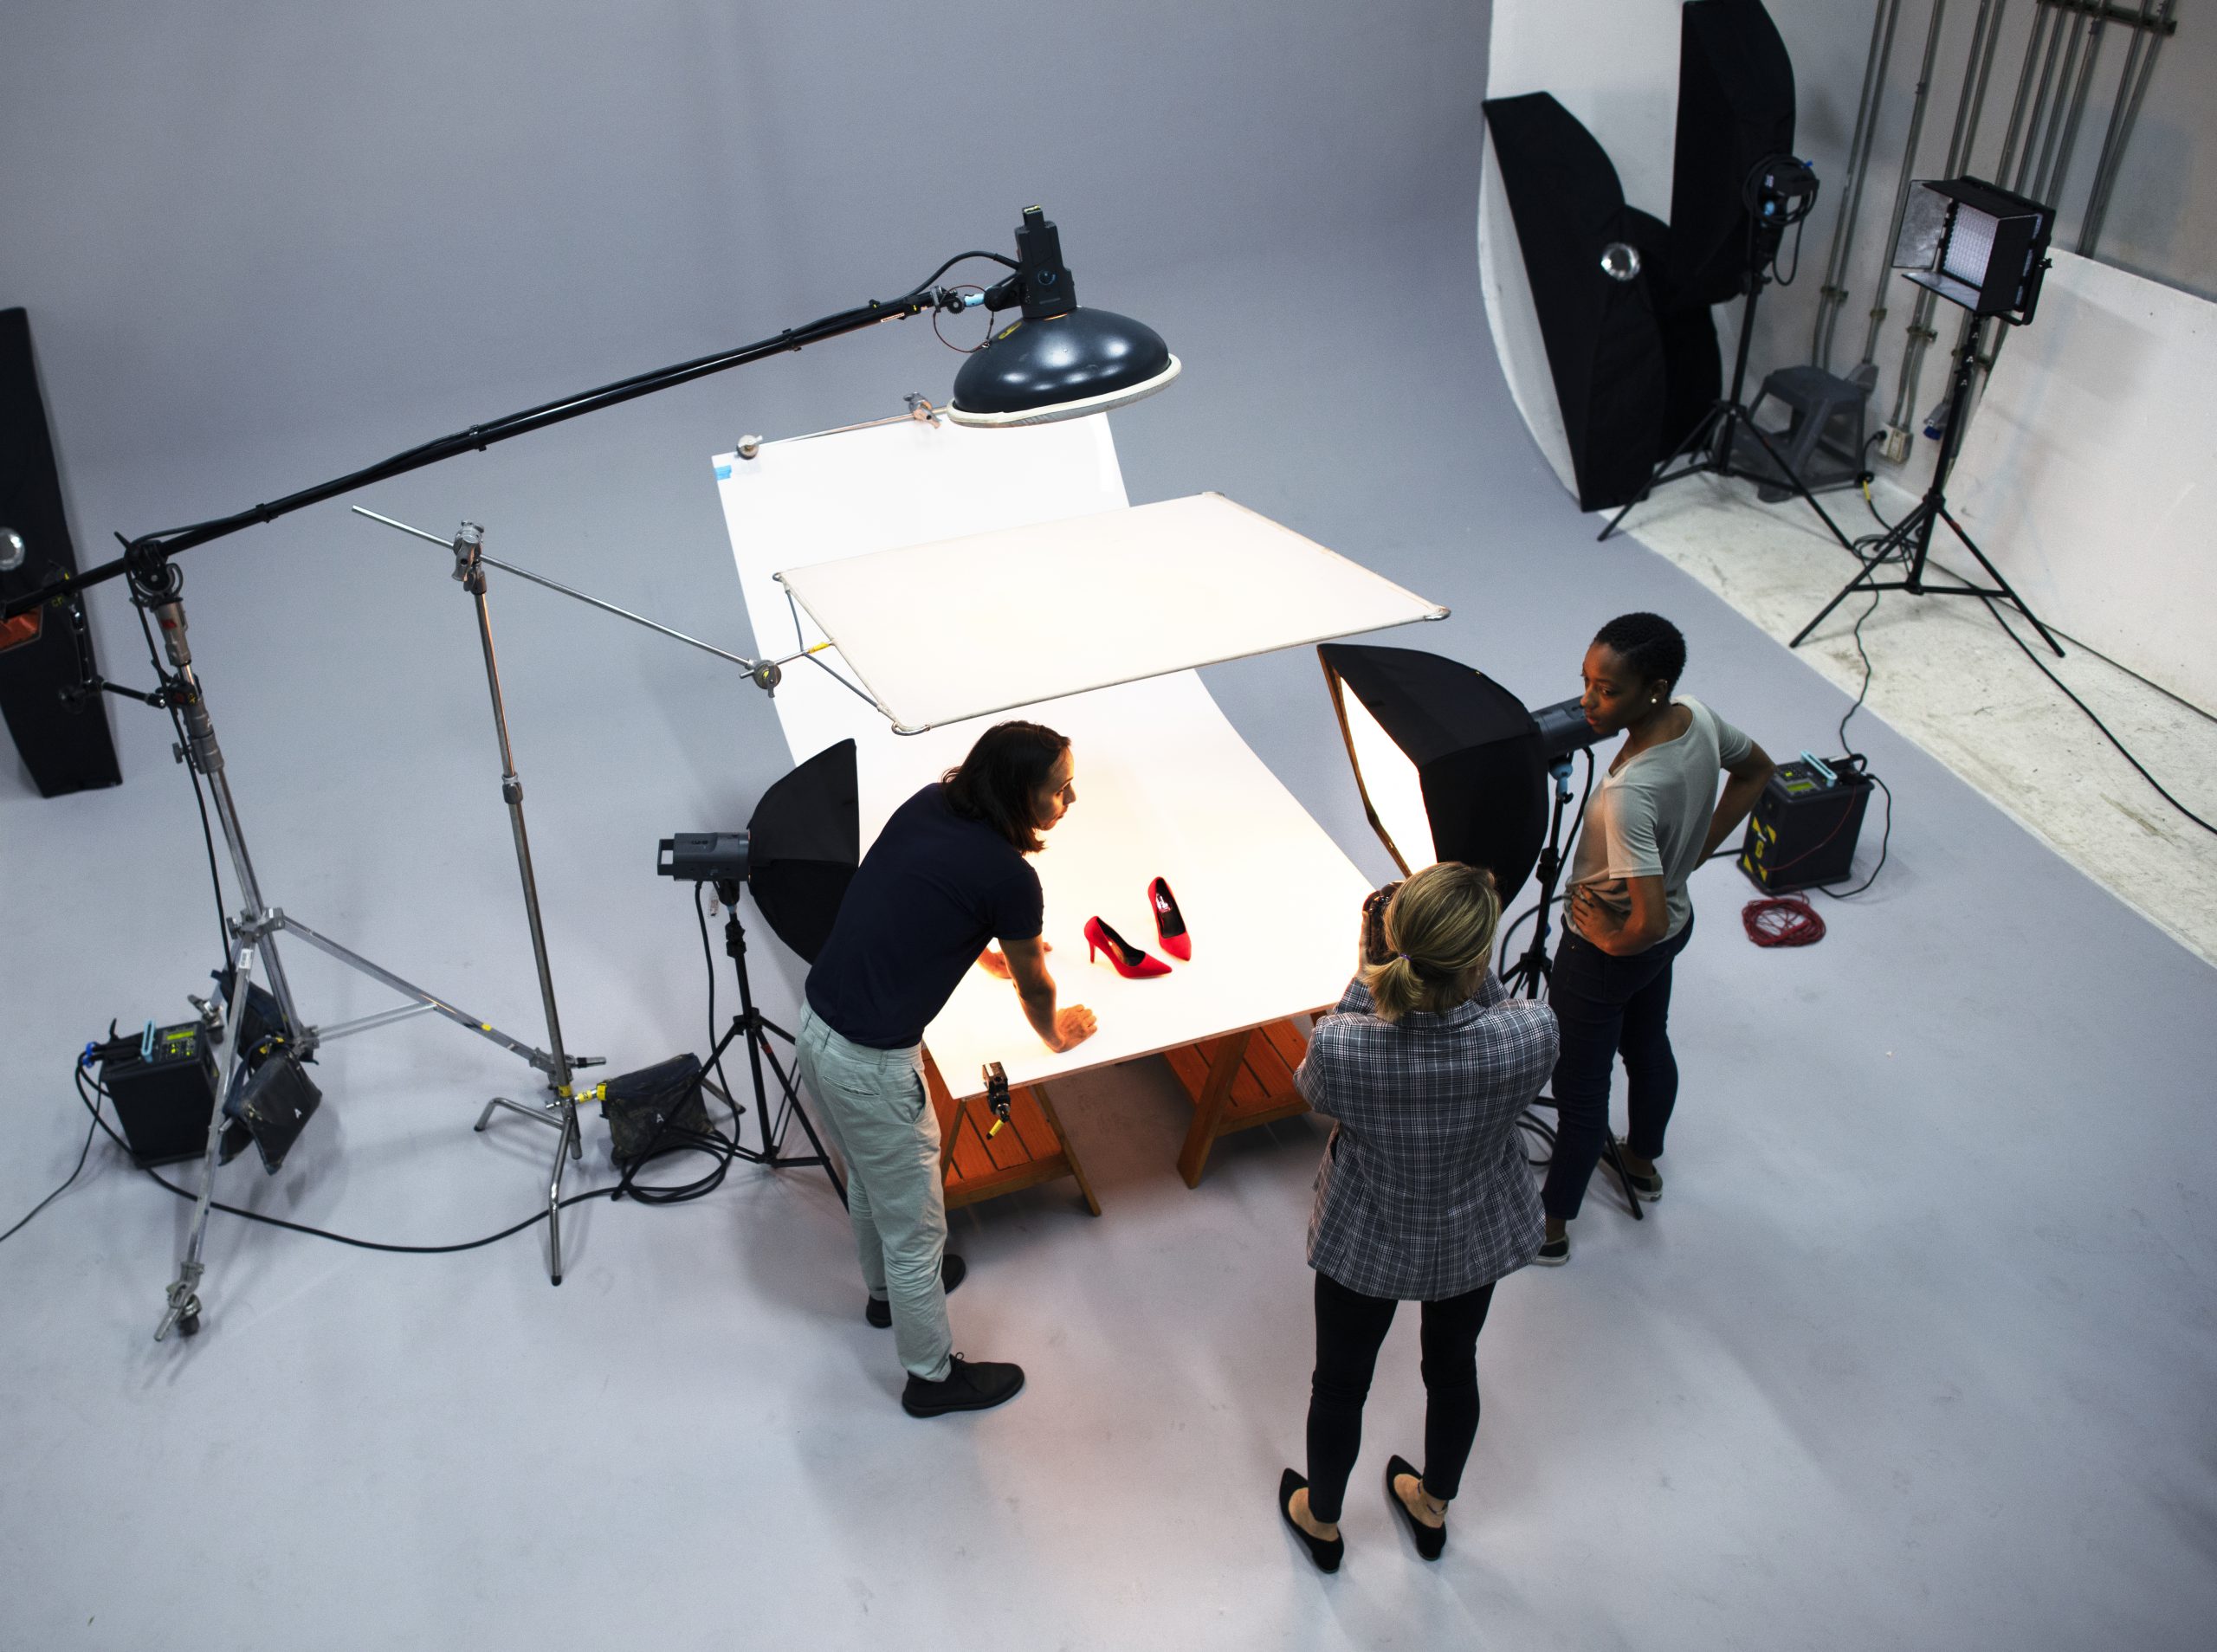 5 Fantastic Product Photography Ideas to Help Boost Sales